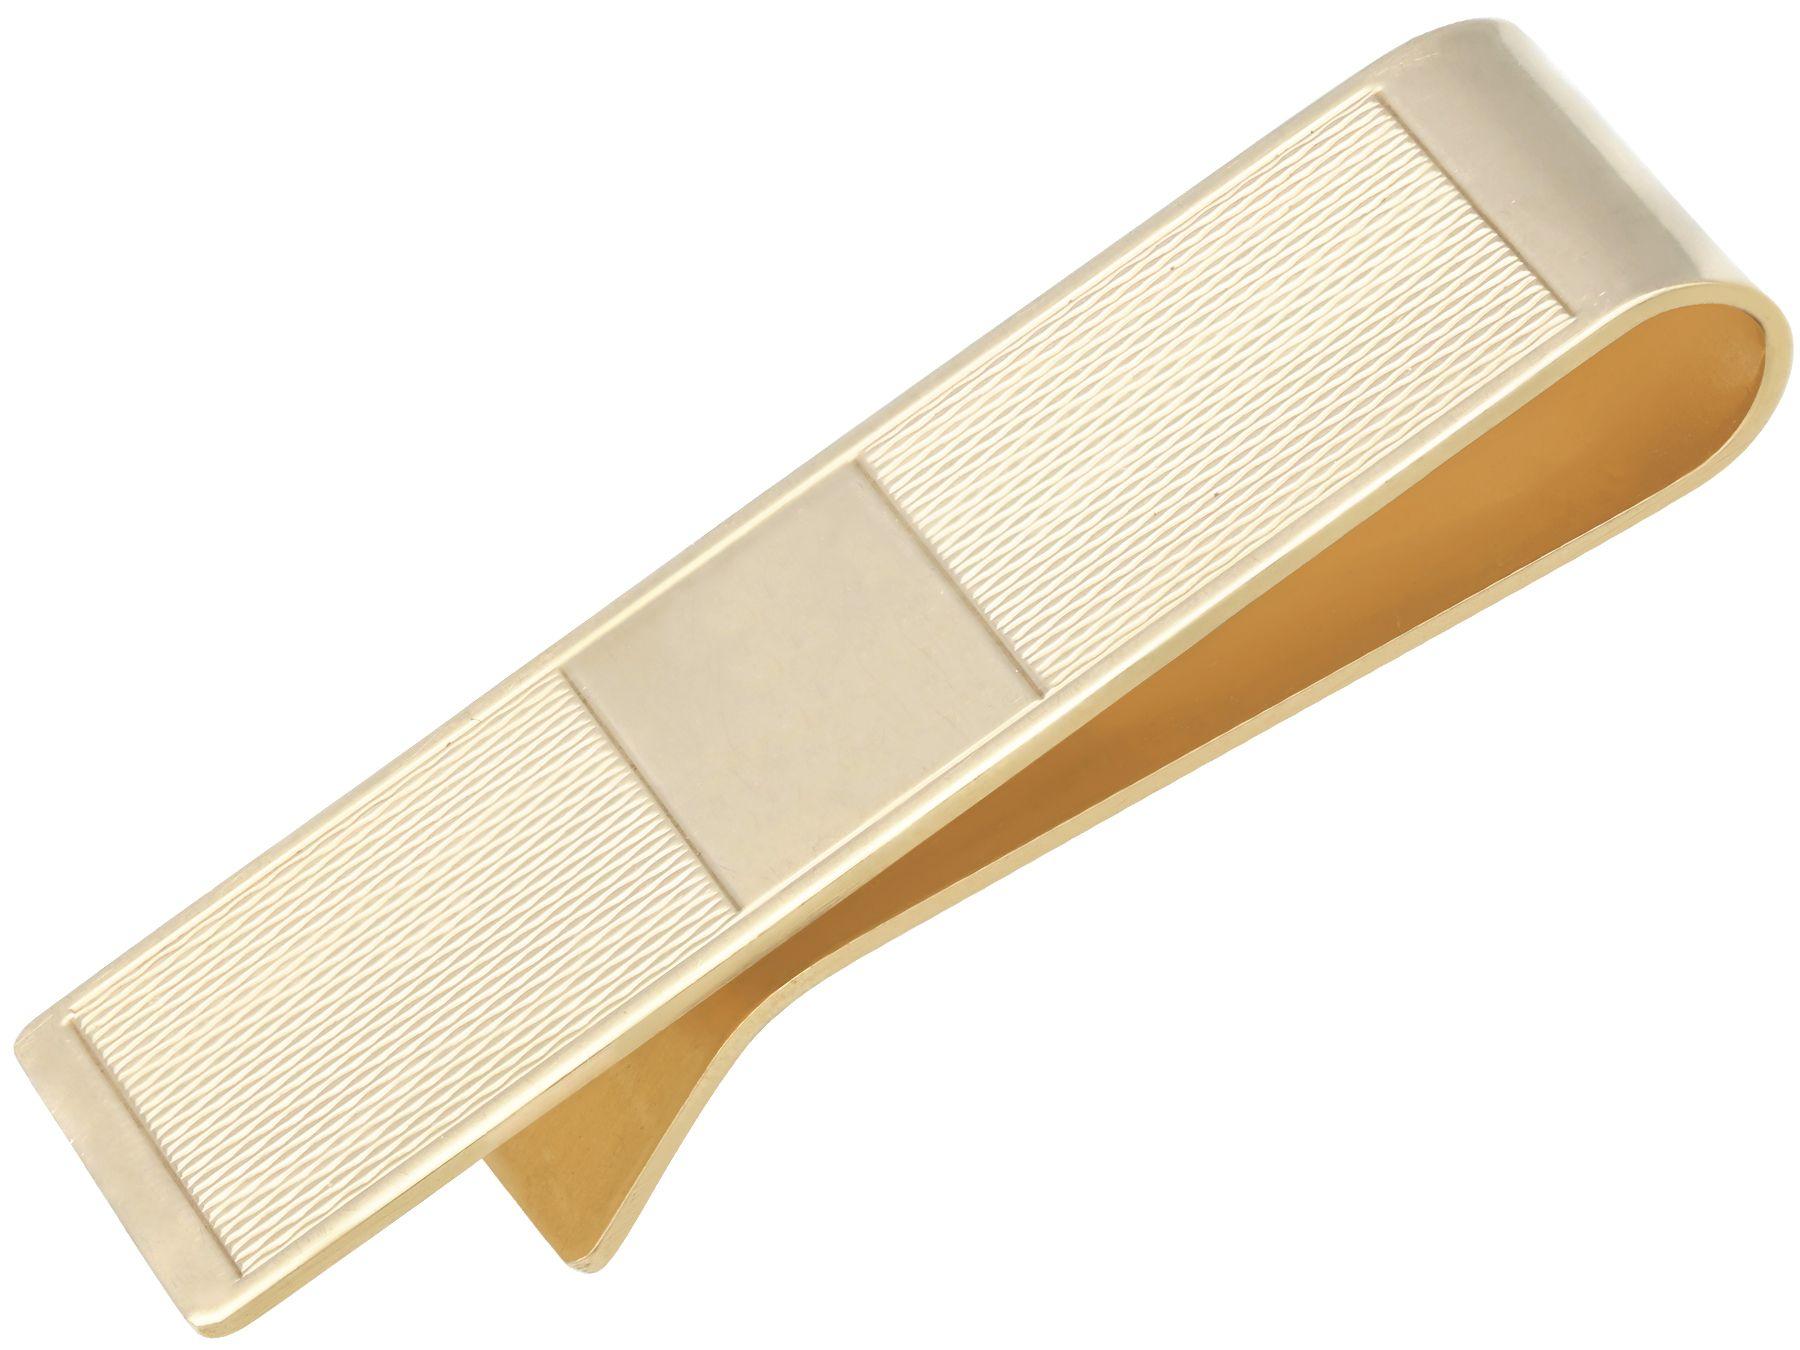 Vintage 1990s Yellow Gold Tie Clip In Excellent Condition For Sale In Jesmond, Newcastle Upon Tyne